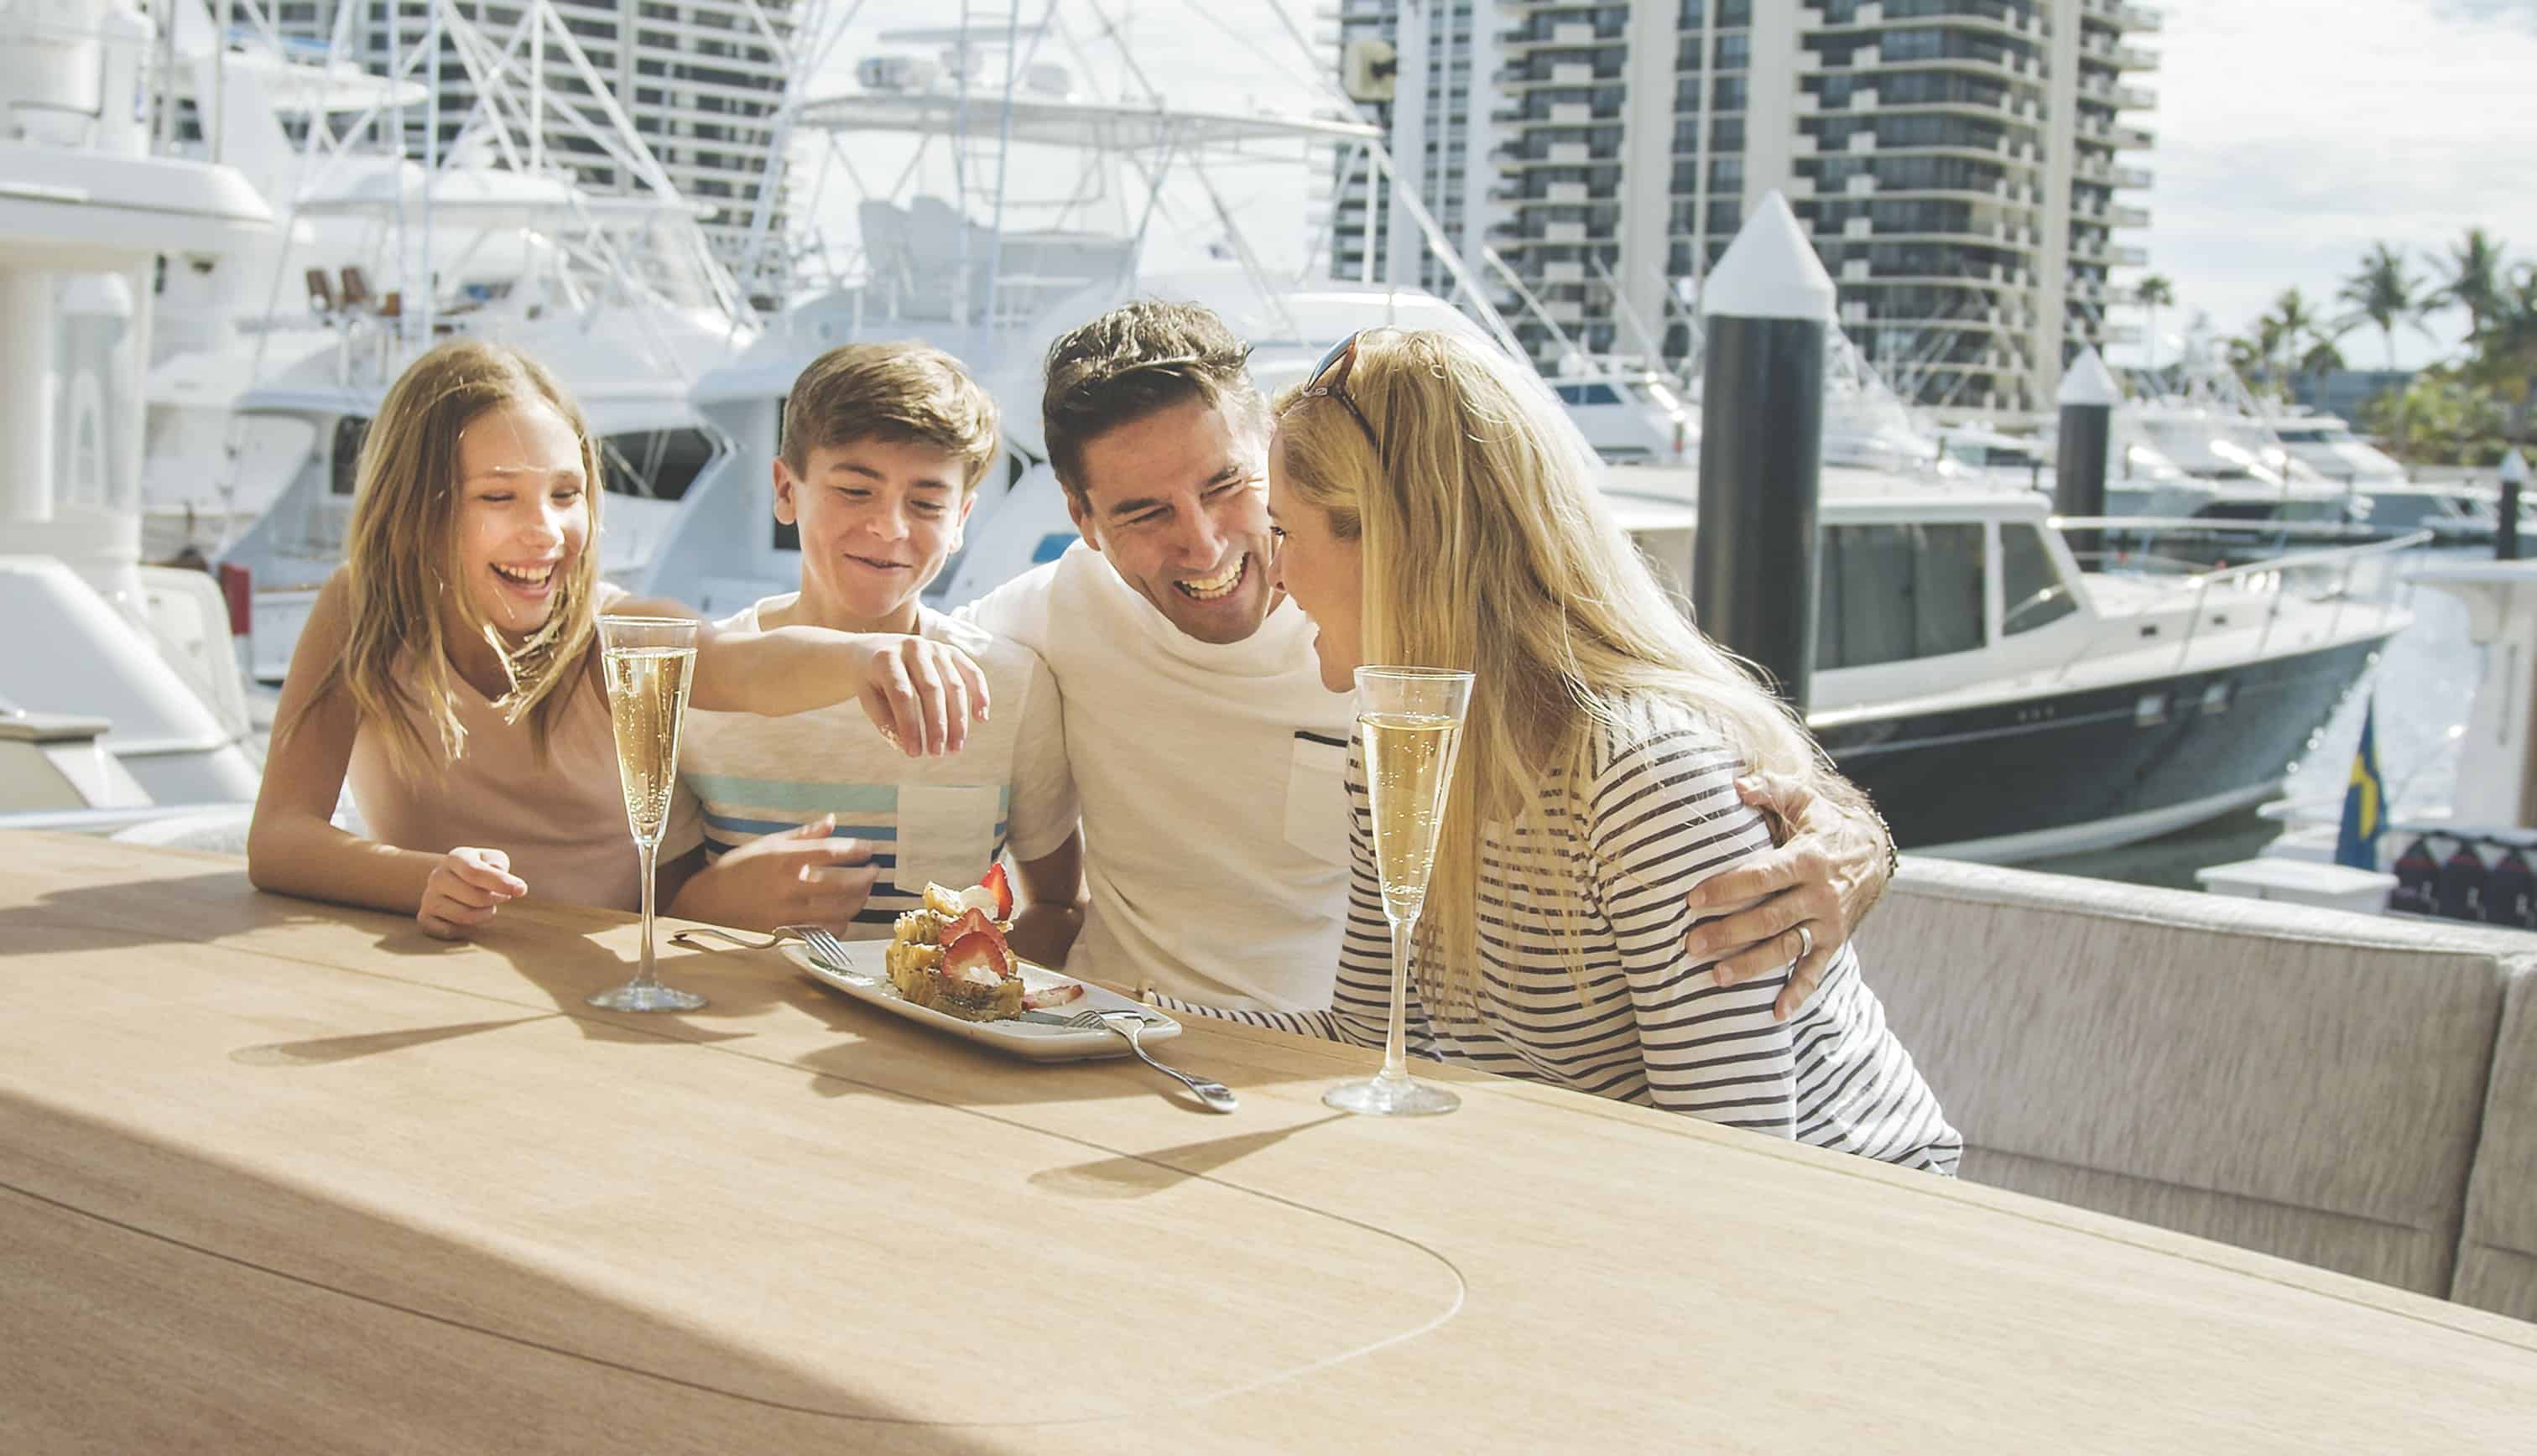 family smiling on boat